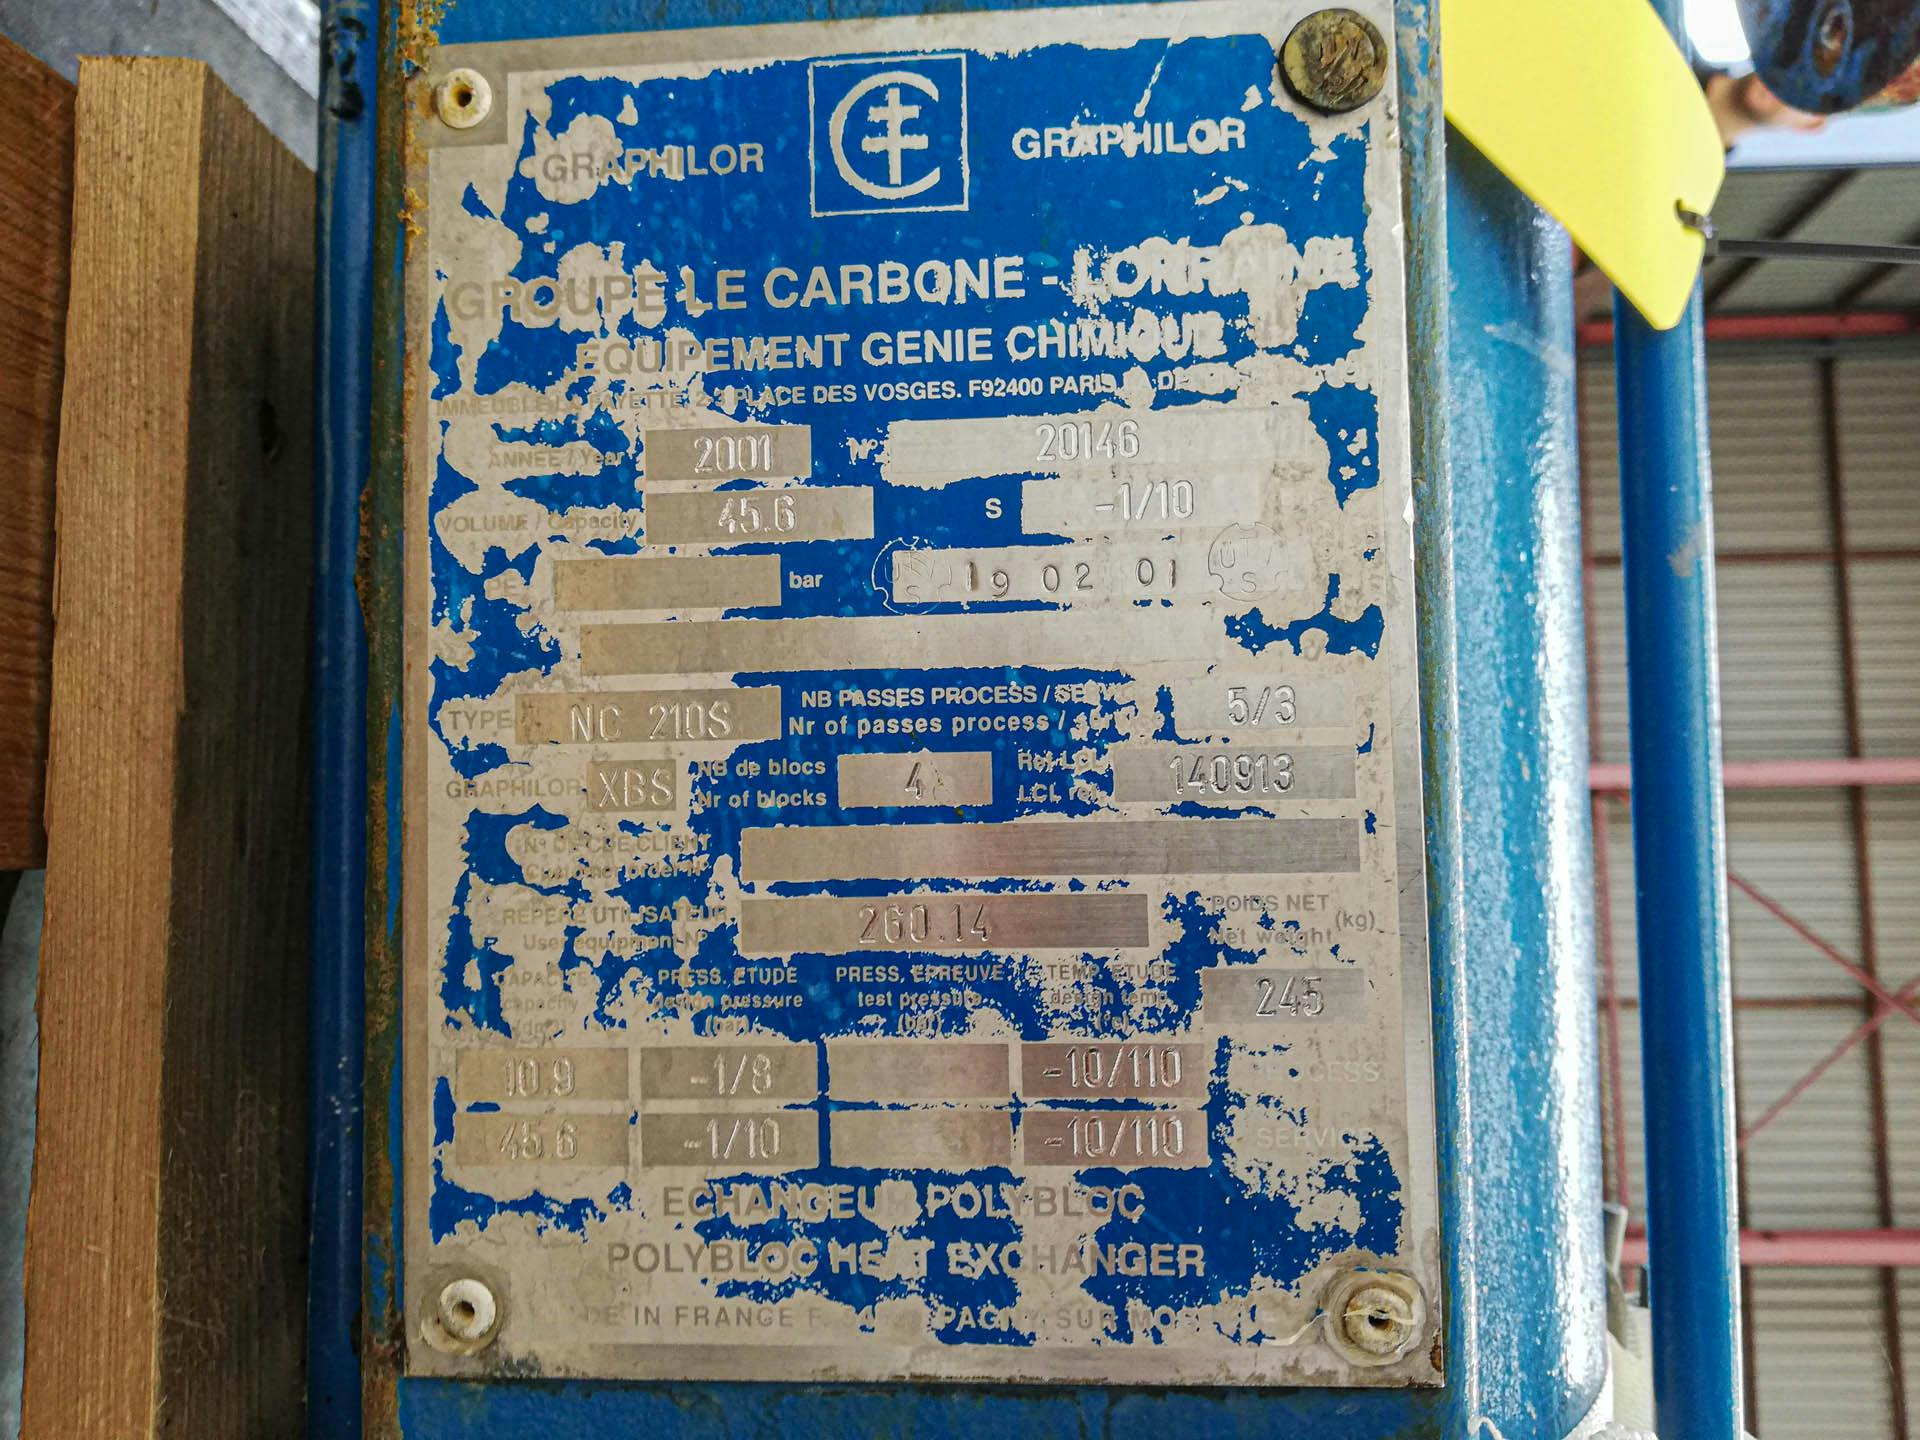 Le Carbone-Lorraine NC210S - Shell and tube heat exchanger - image 5